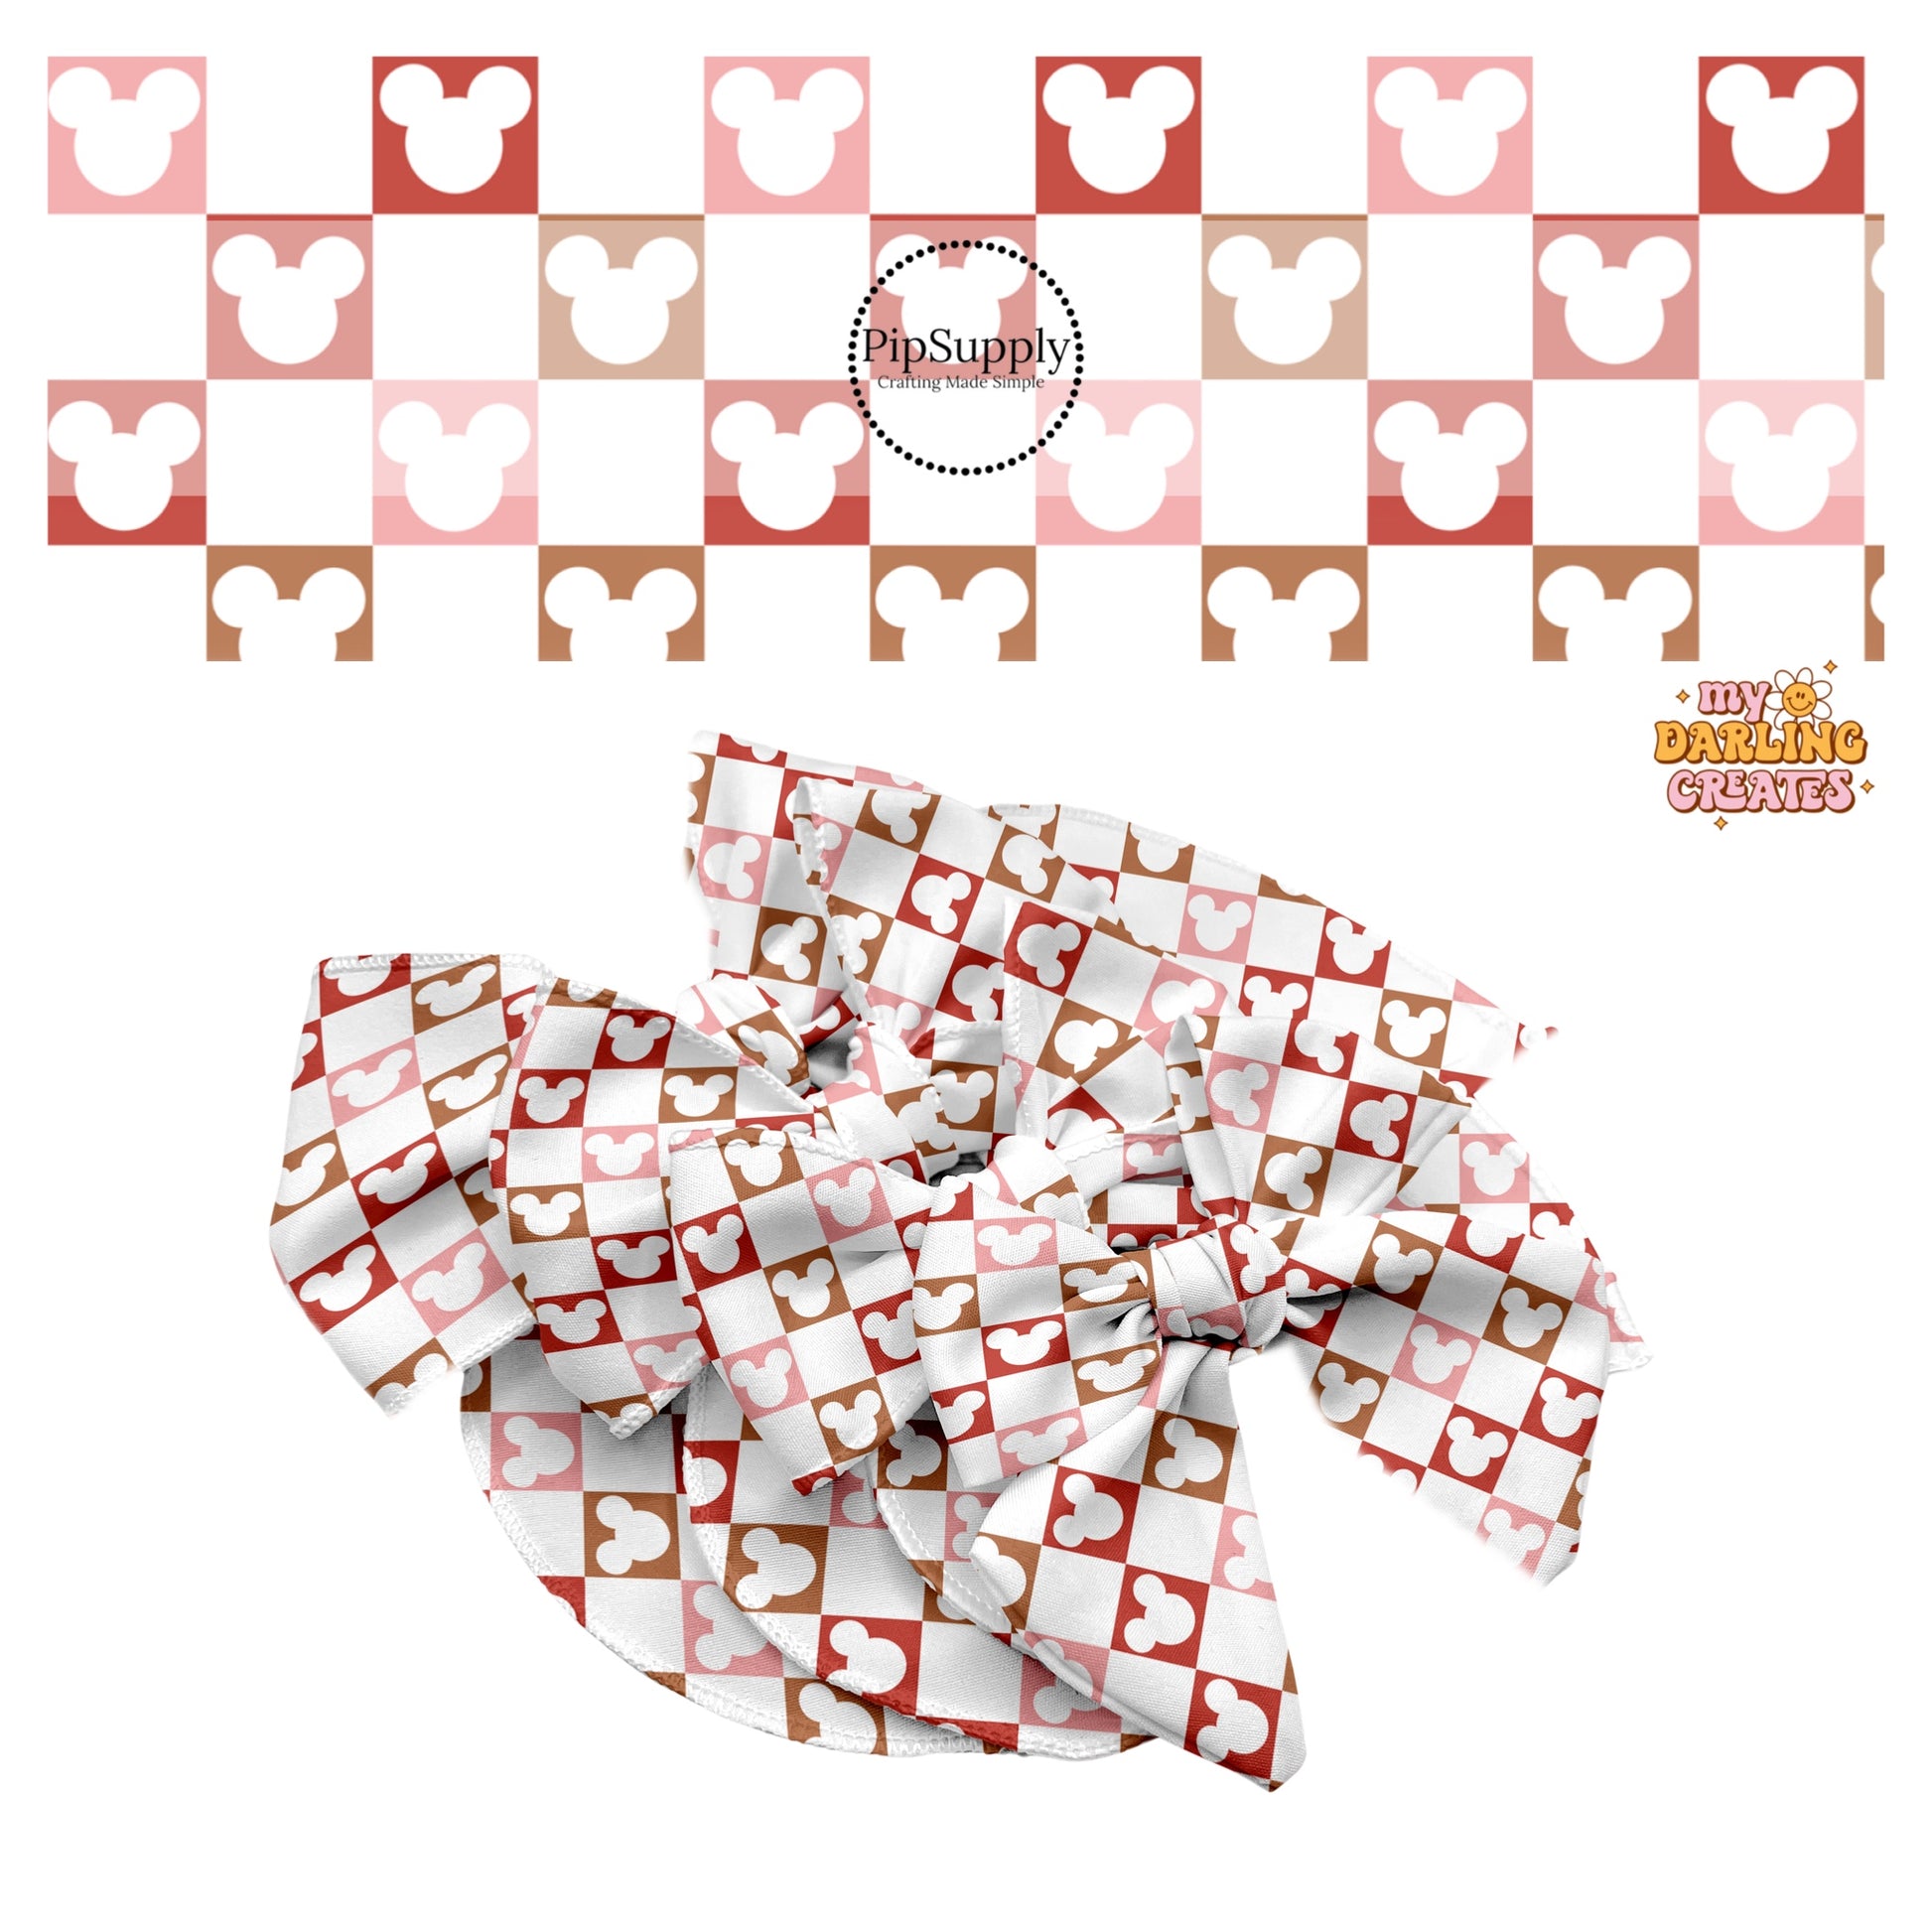 Red, pink, and brown mouse head cutouts on white checkered hair bow strips